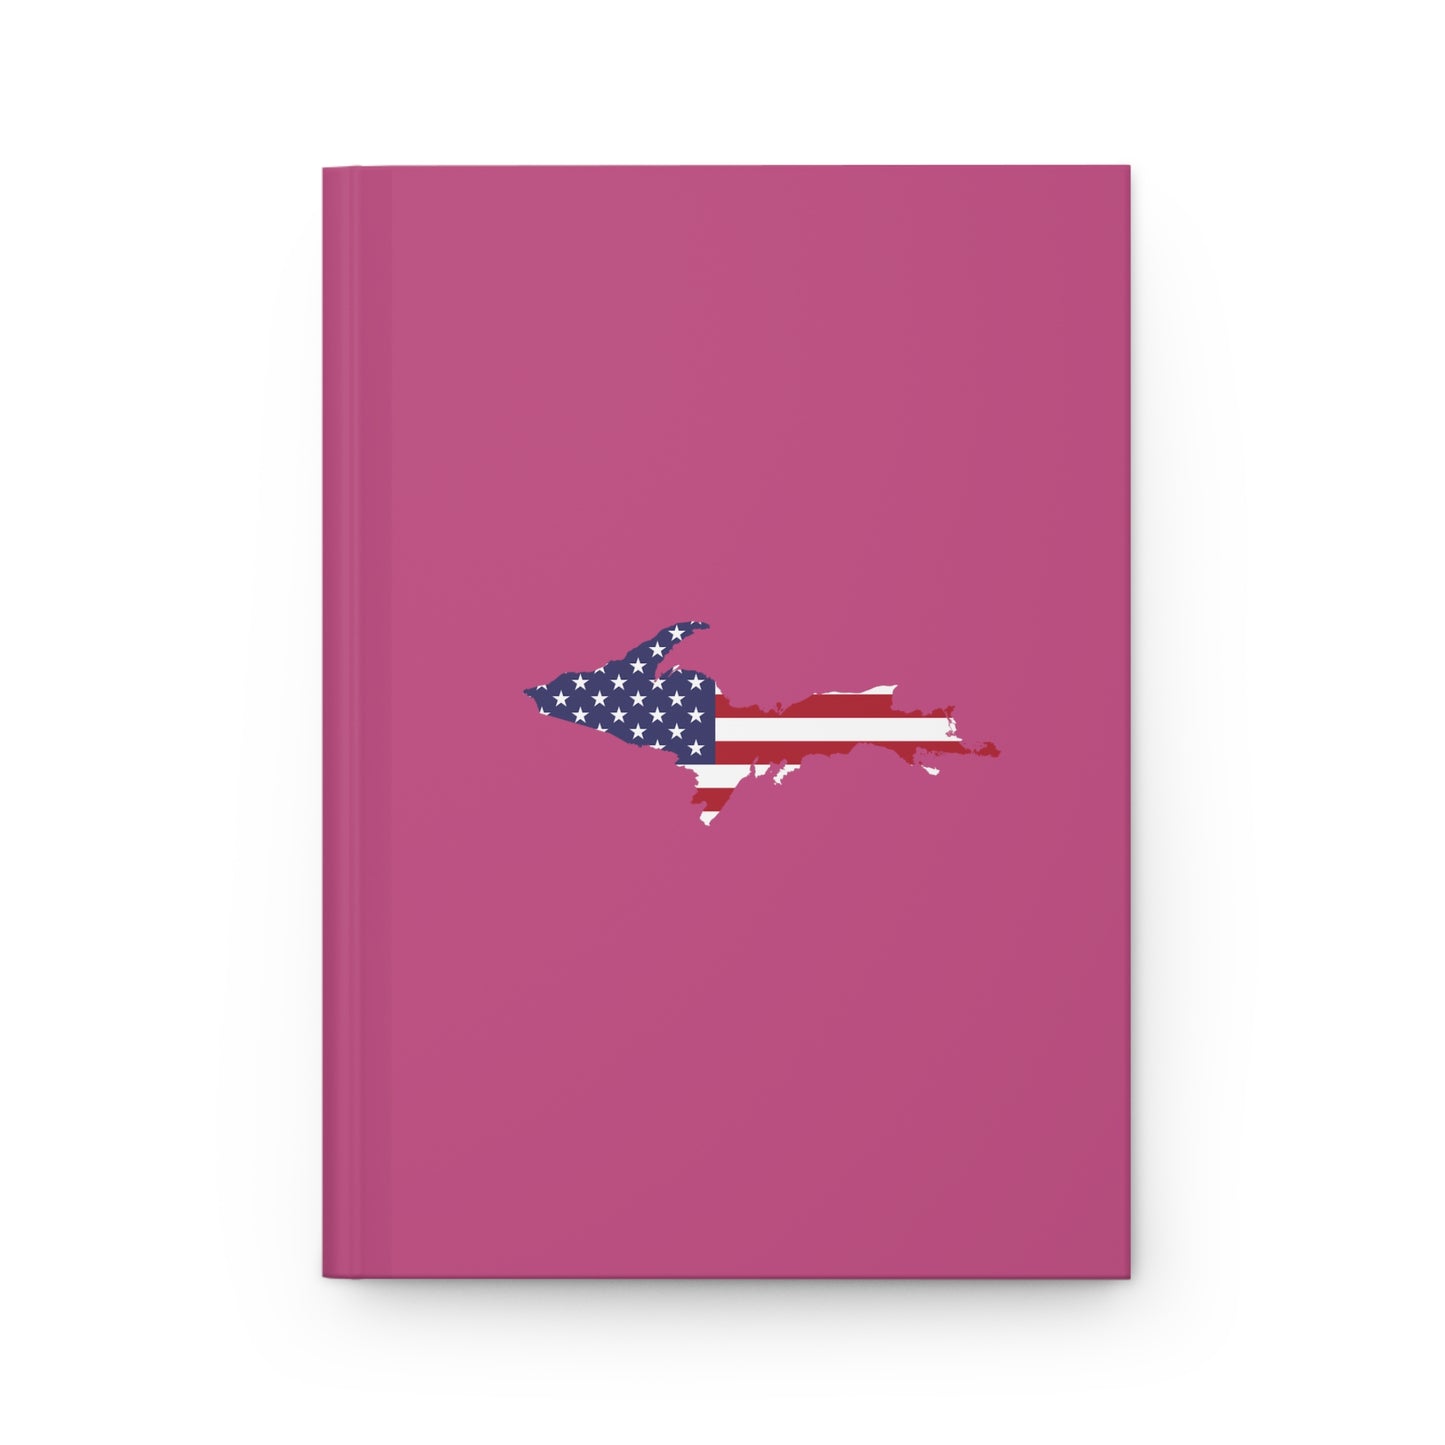 Michigan Upper Peninsula Hardcover Journal (w/ UP USA Flag) | Ruled - Apple Blossom Pink